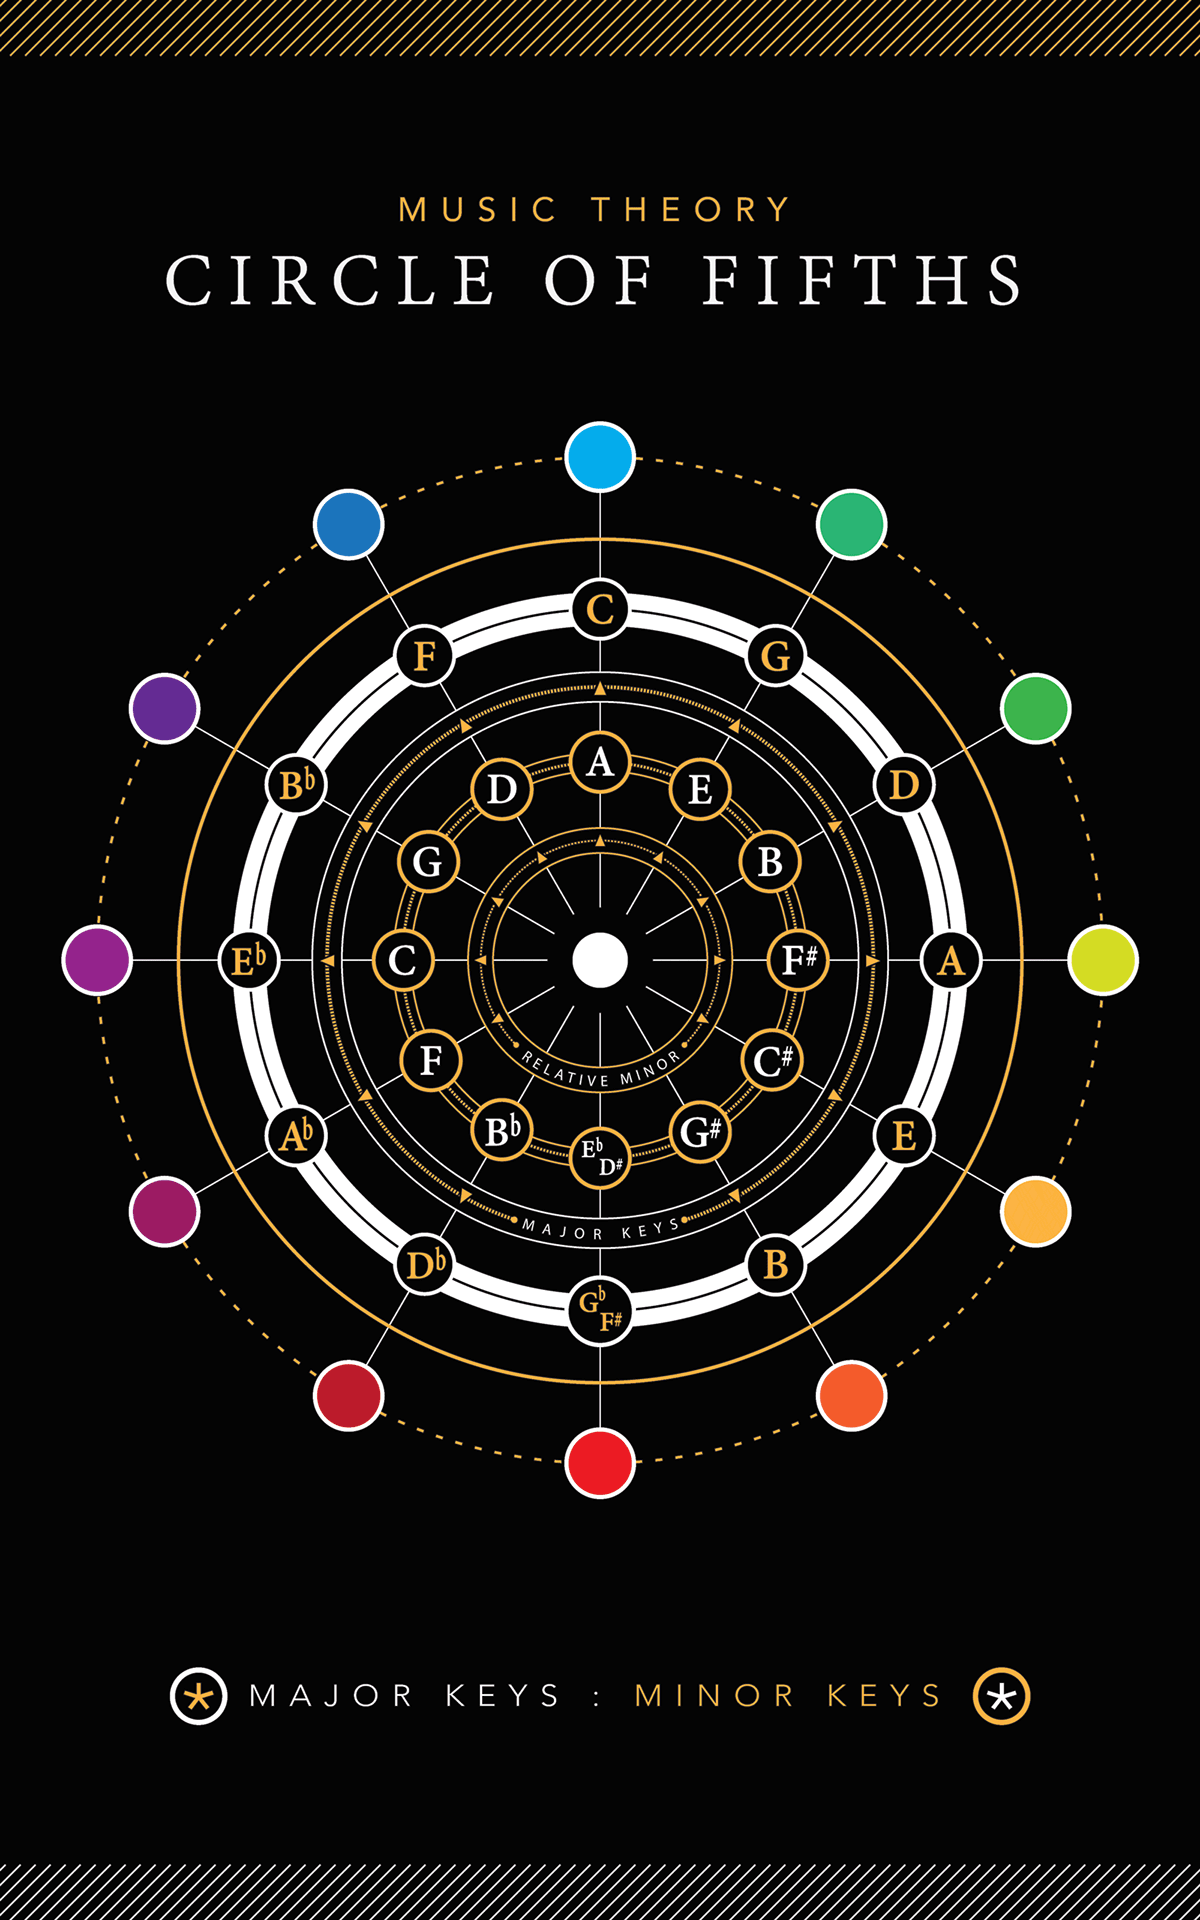 infographic music theory circle of fifths on behance